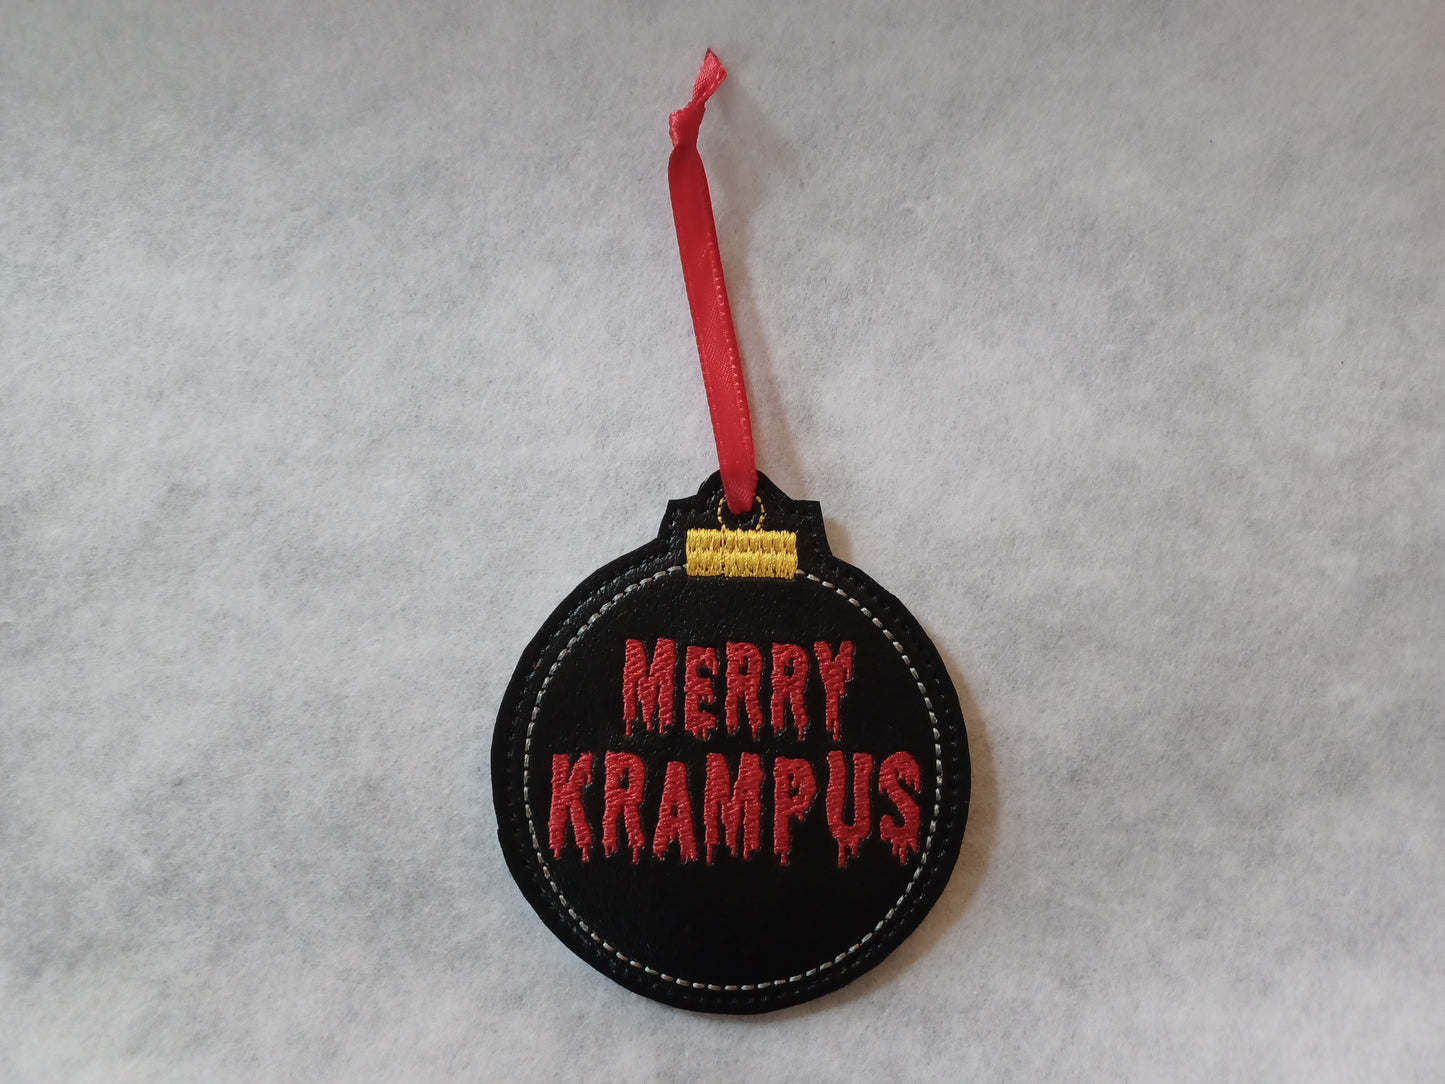 Spooky Christmas Greetings Embroidered Ornament Collection